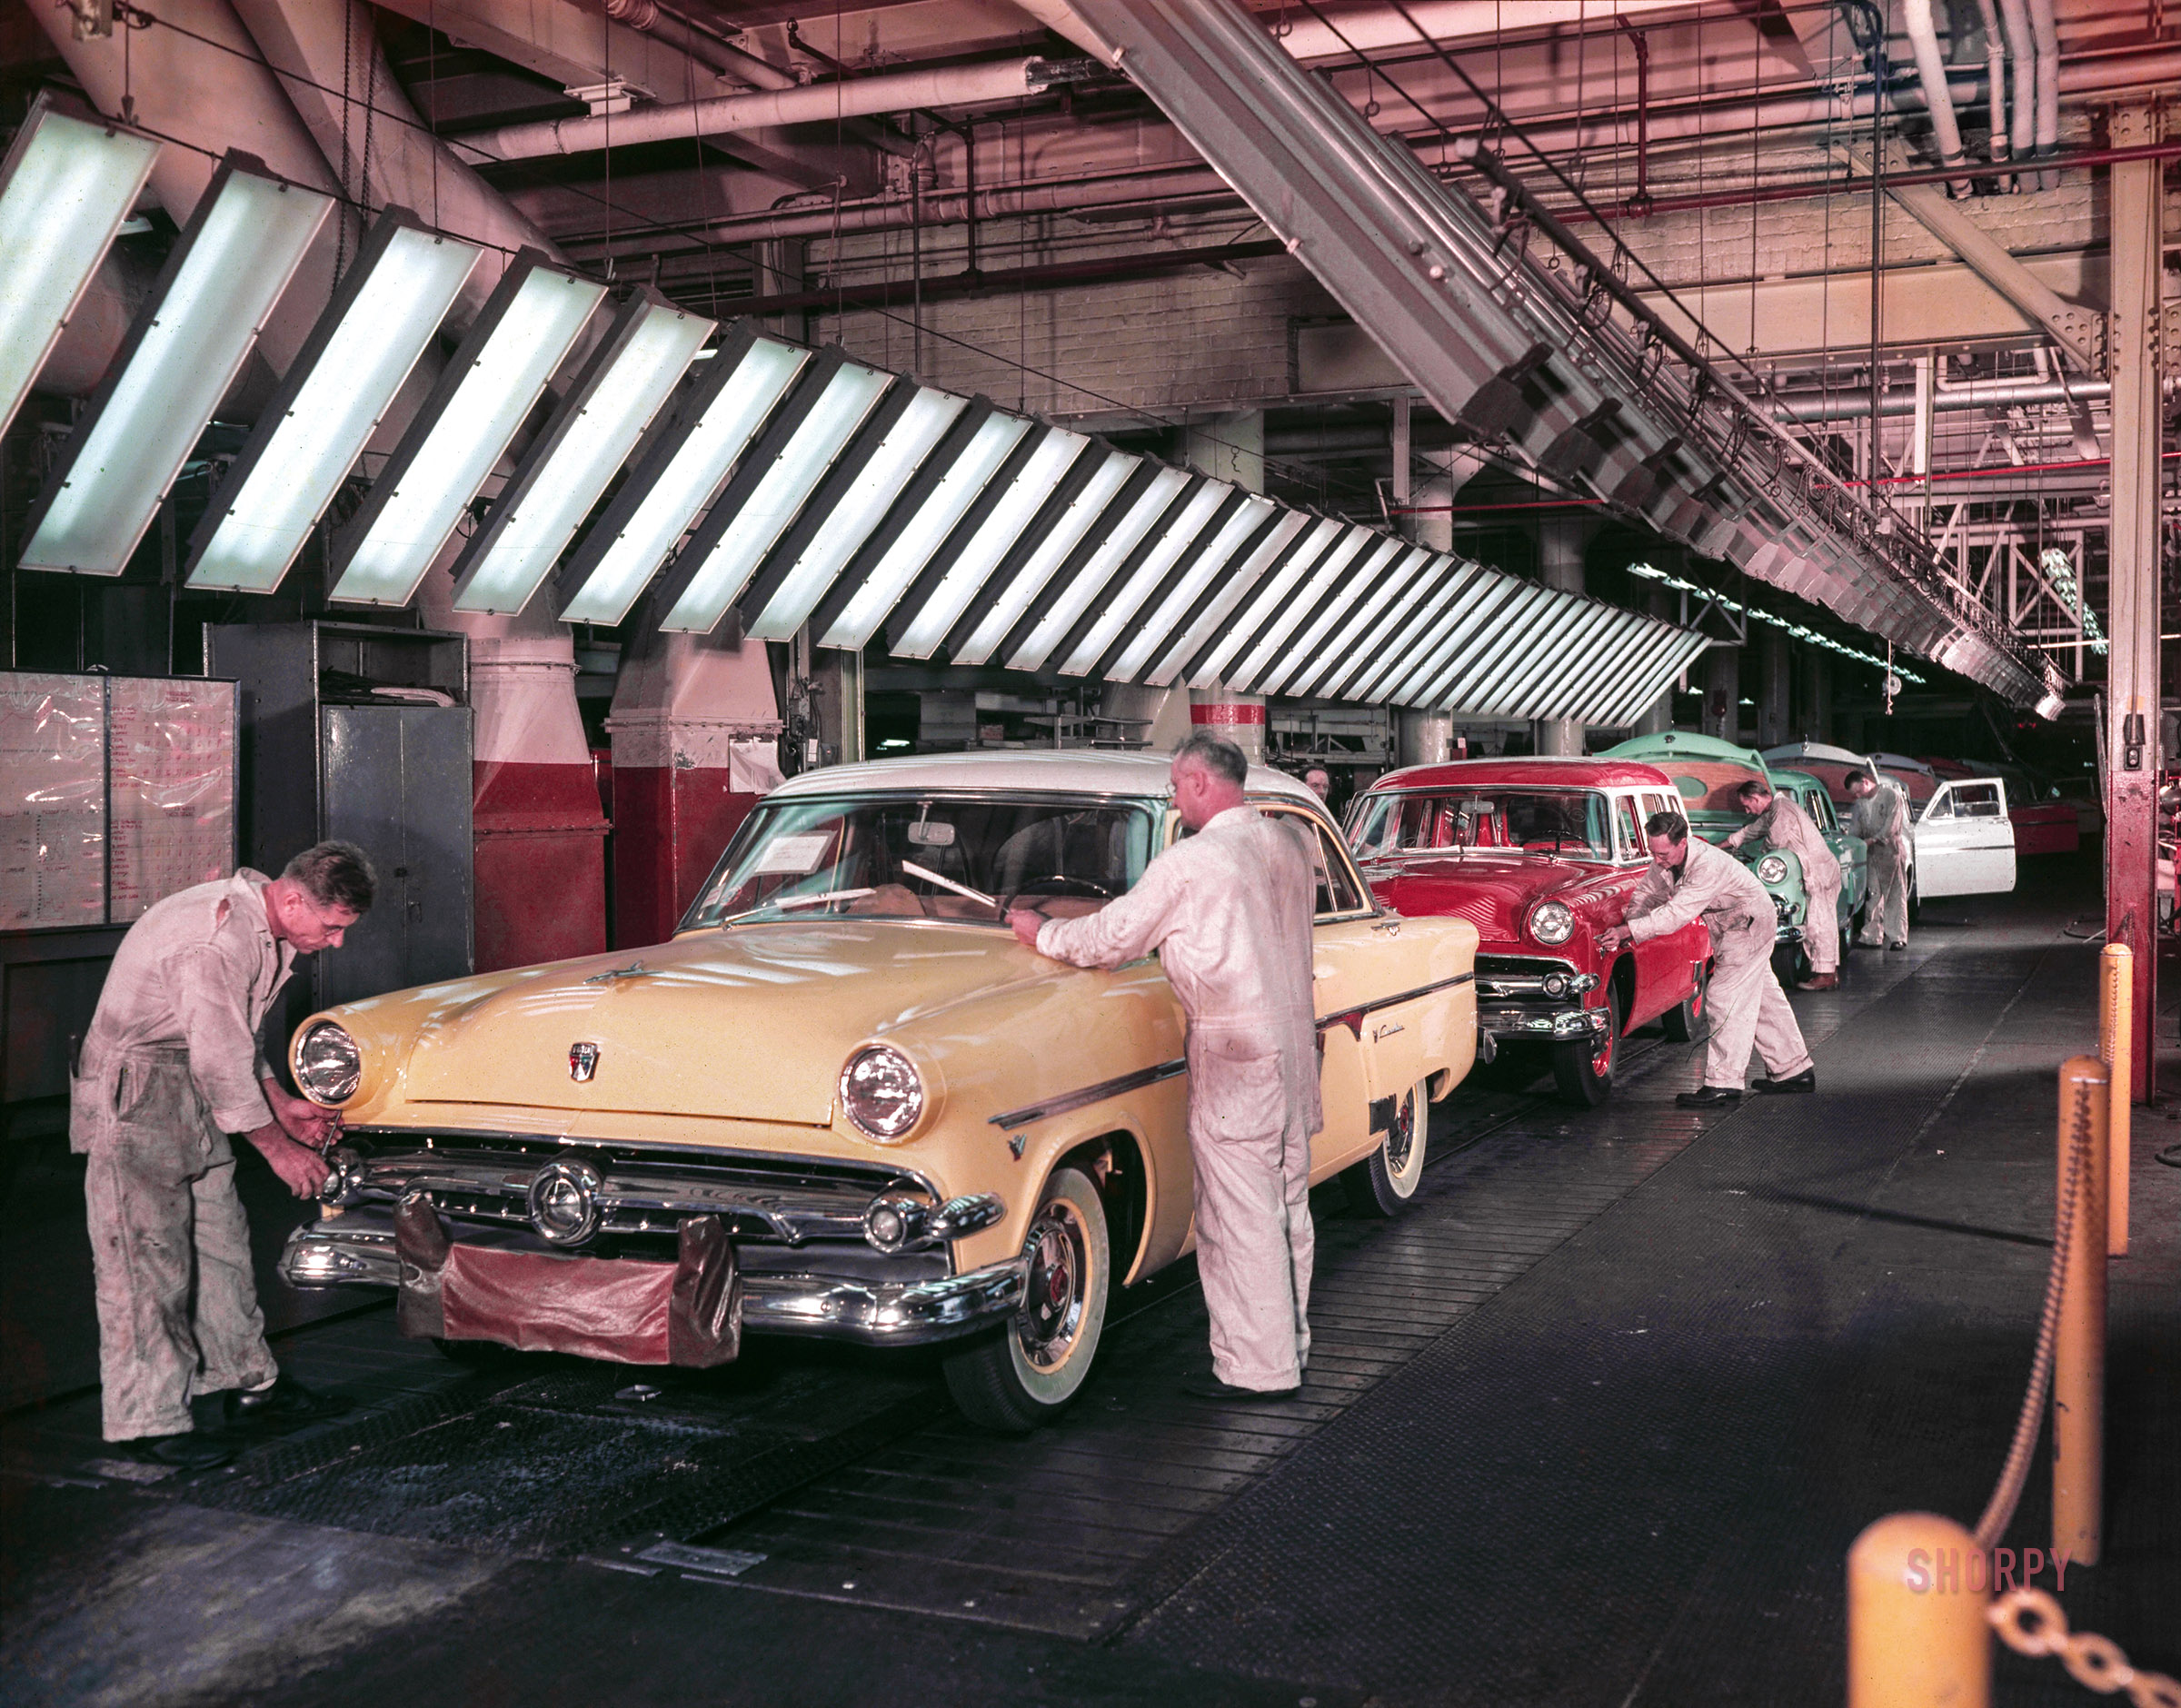 "1954 Fords -- Dearborn assembly plant final line." Watching the Fords go by in a variety of Easter egg hues. Color transparency from the Ford Motor Co. photo archive. View full size.